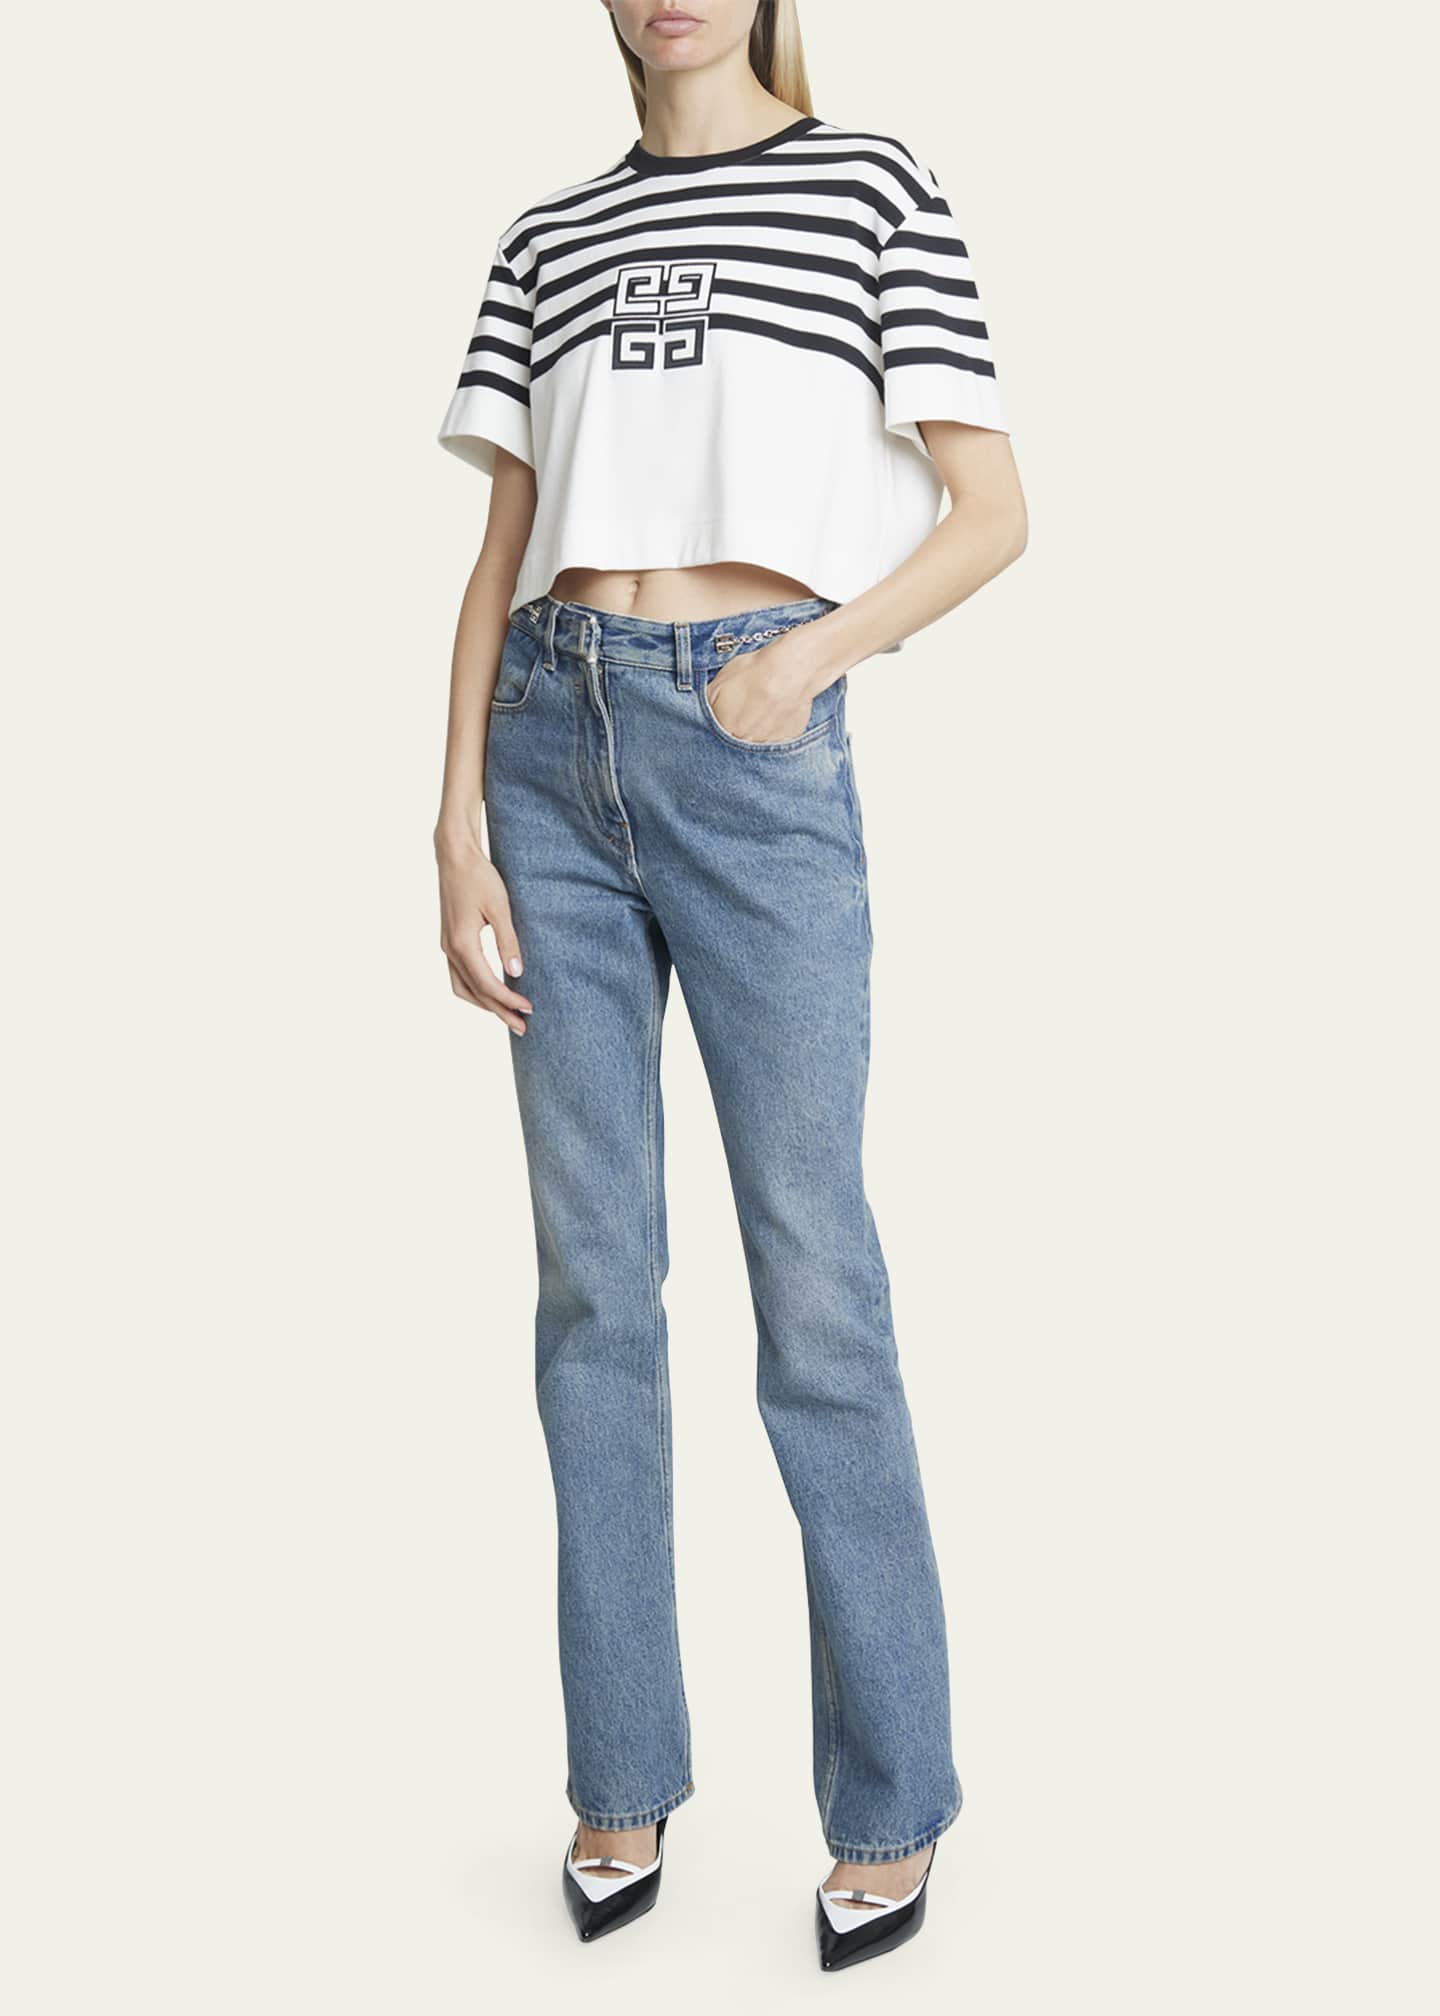 Givenchy Cropped T-Shirt with 4G Logo - Bergdorf Goodman